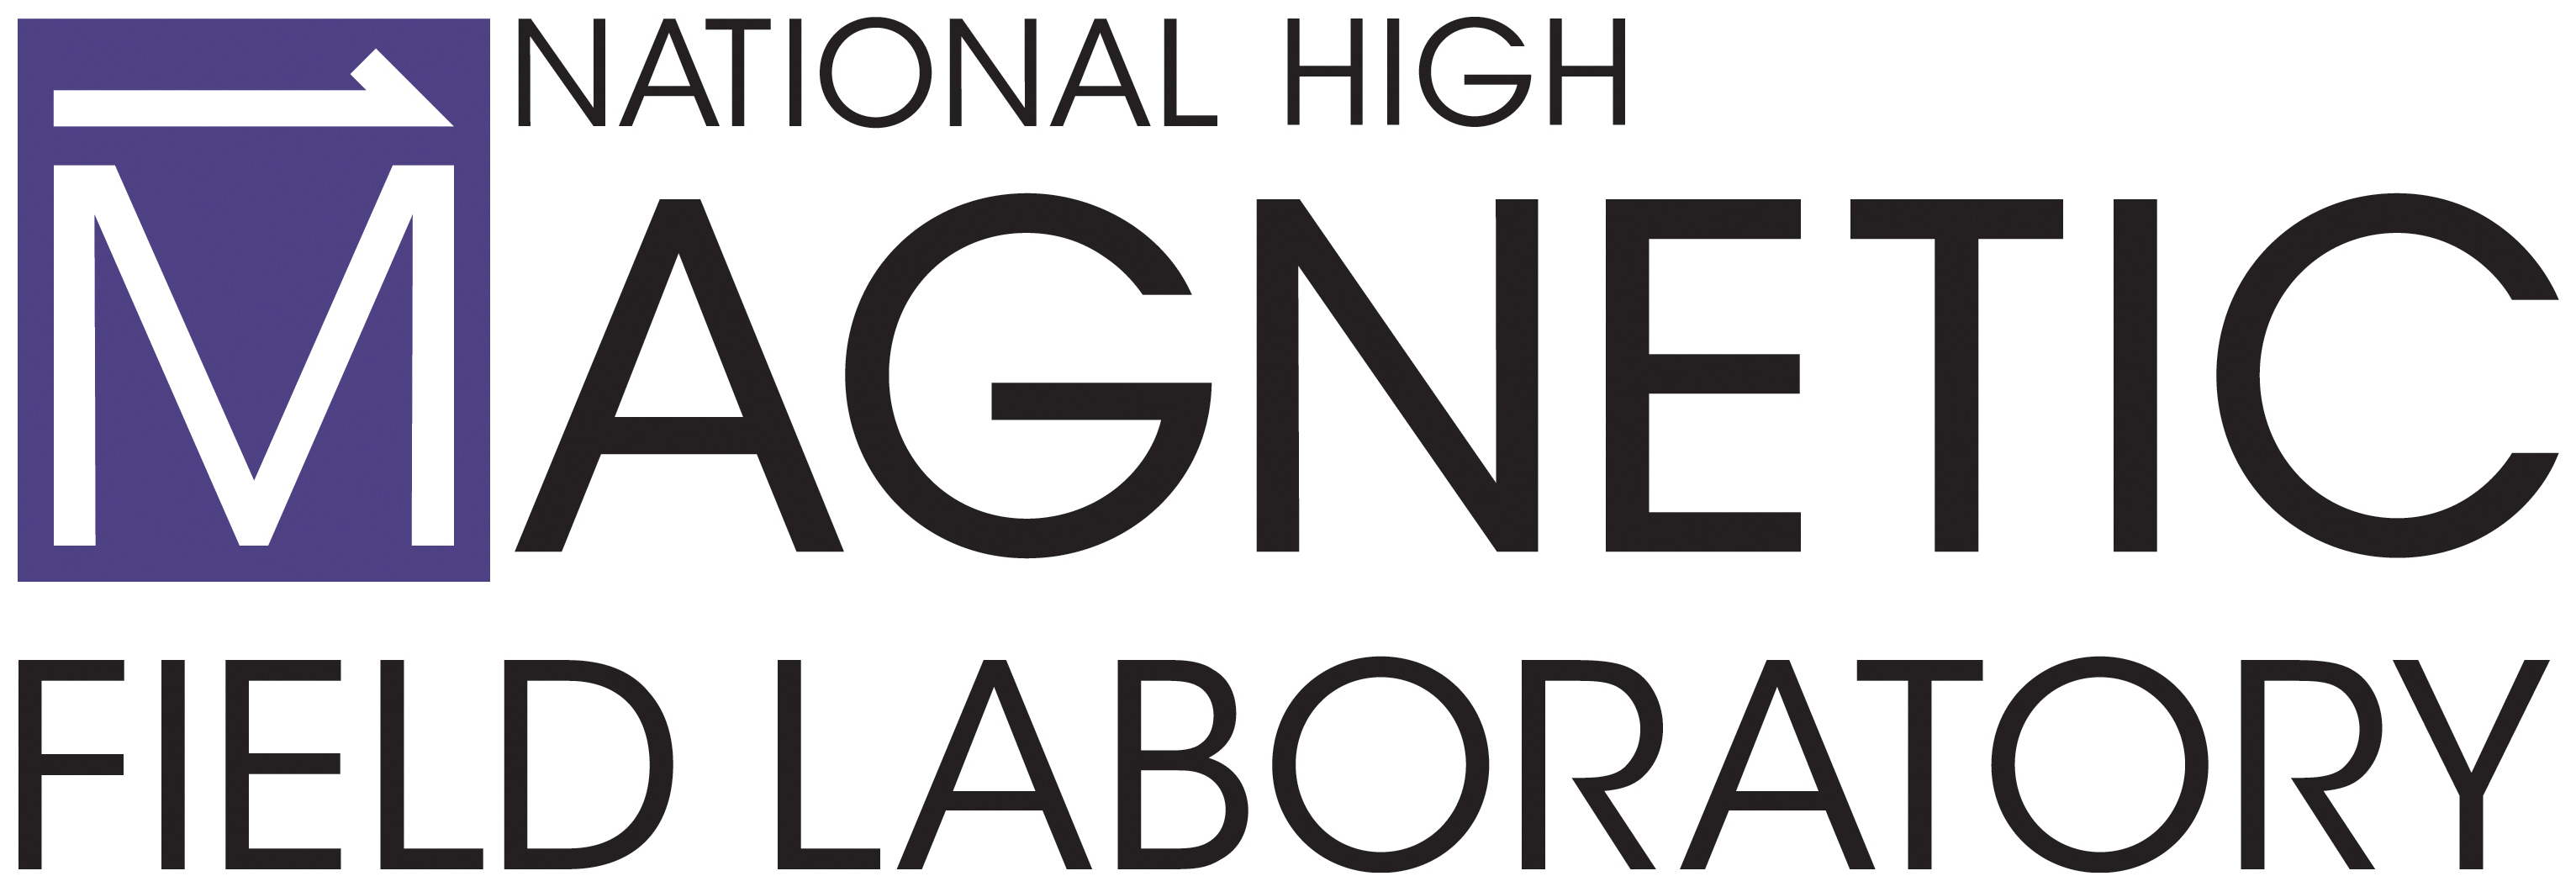 The national high magnetic field laboratory is located in Innovation Park